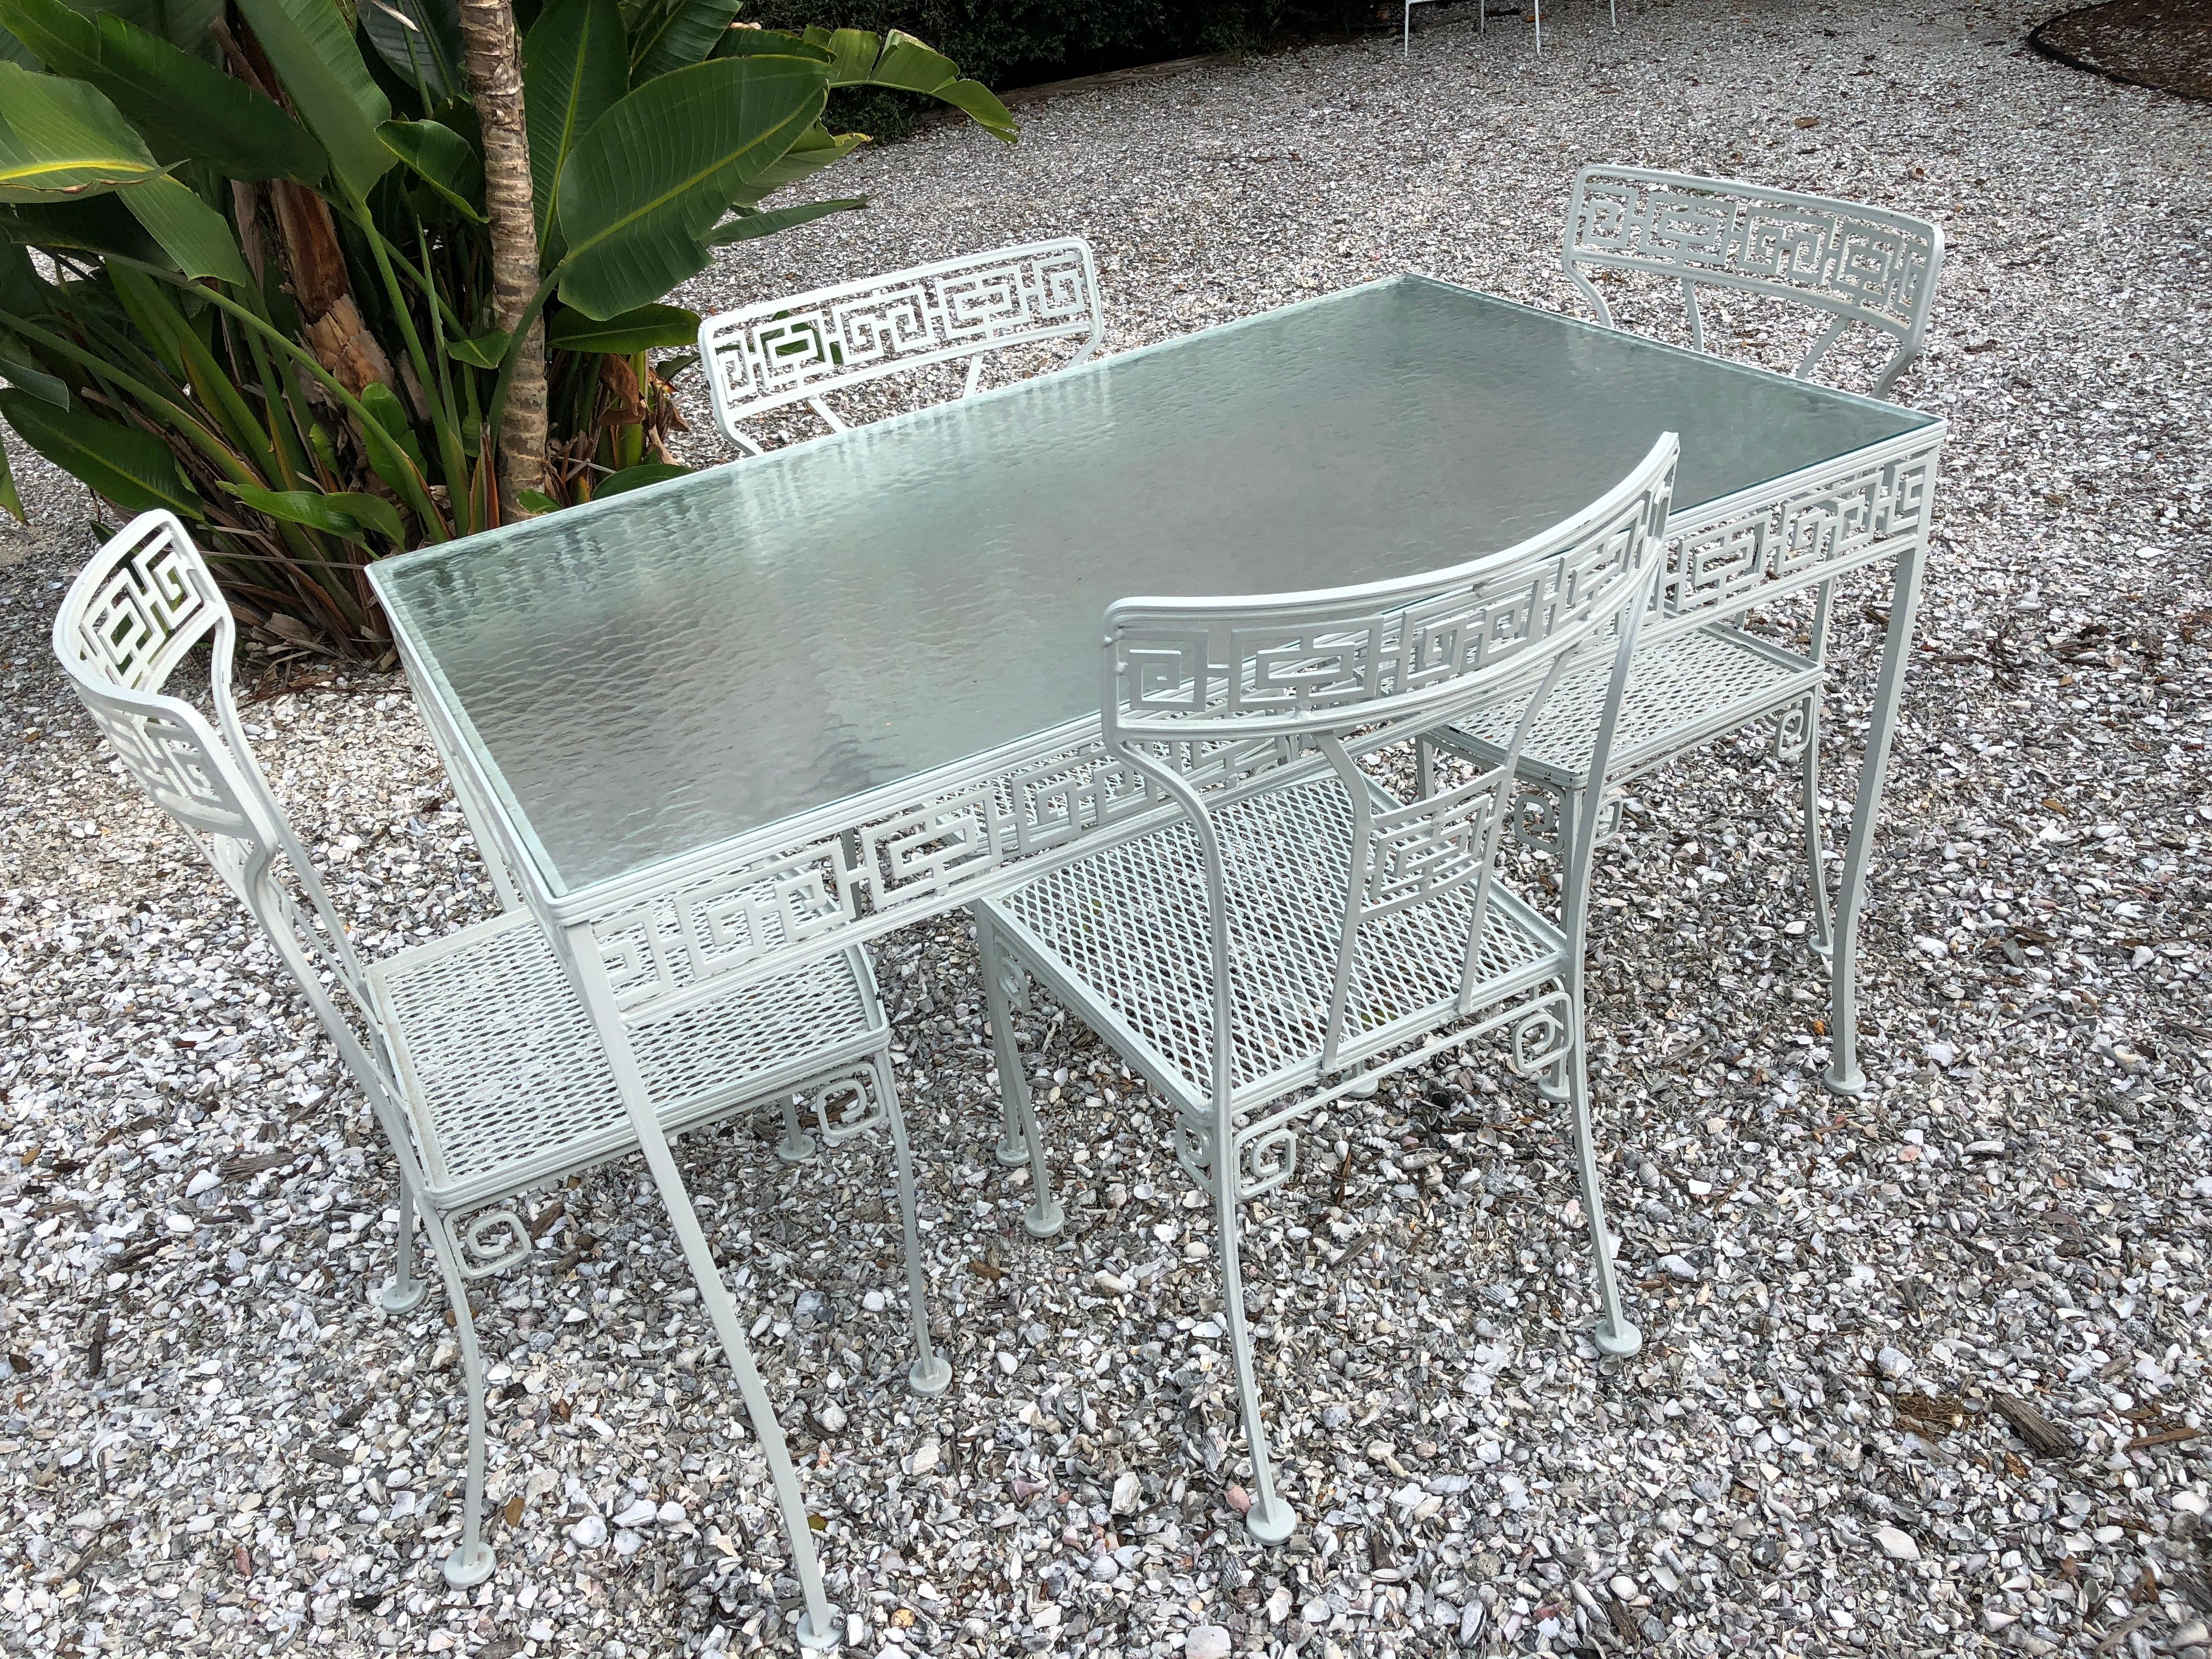 Rarely do you find this table and even more rare is finding it with its original water reflection glass so popular during the 1960s patio pool epiphany. Stunning powder coated white Greek Key pattern table and four matching chairs, powder coated in